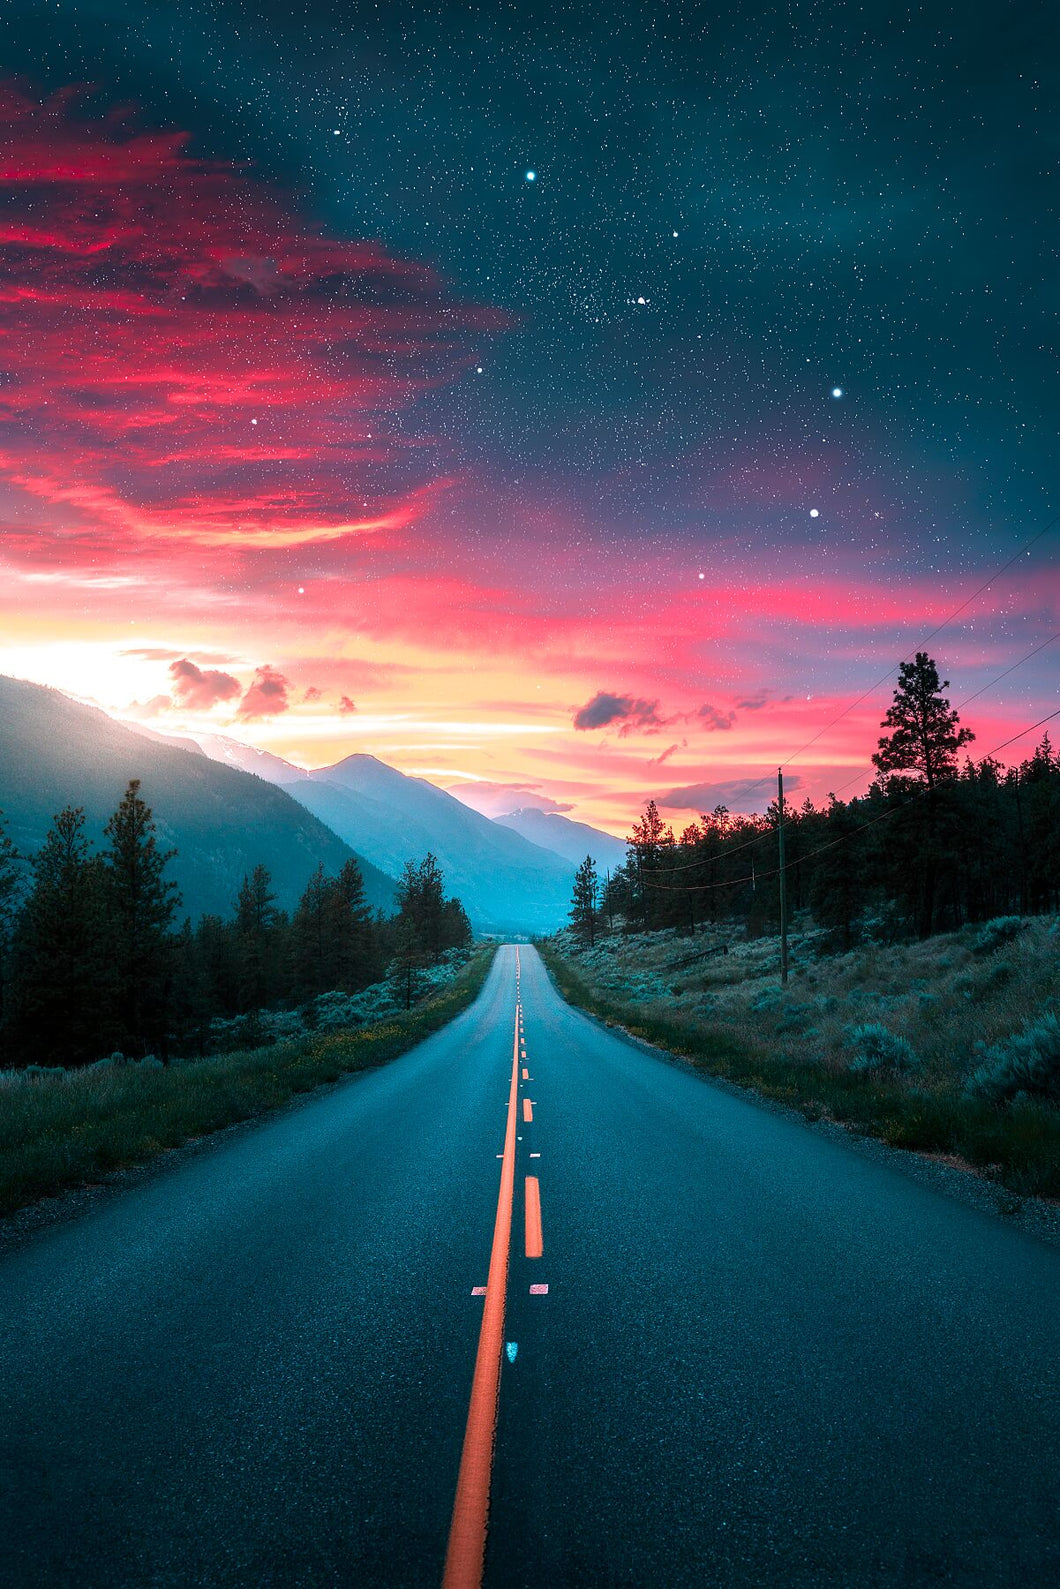 The Highway of Dreams